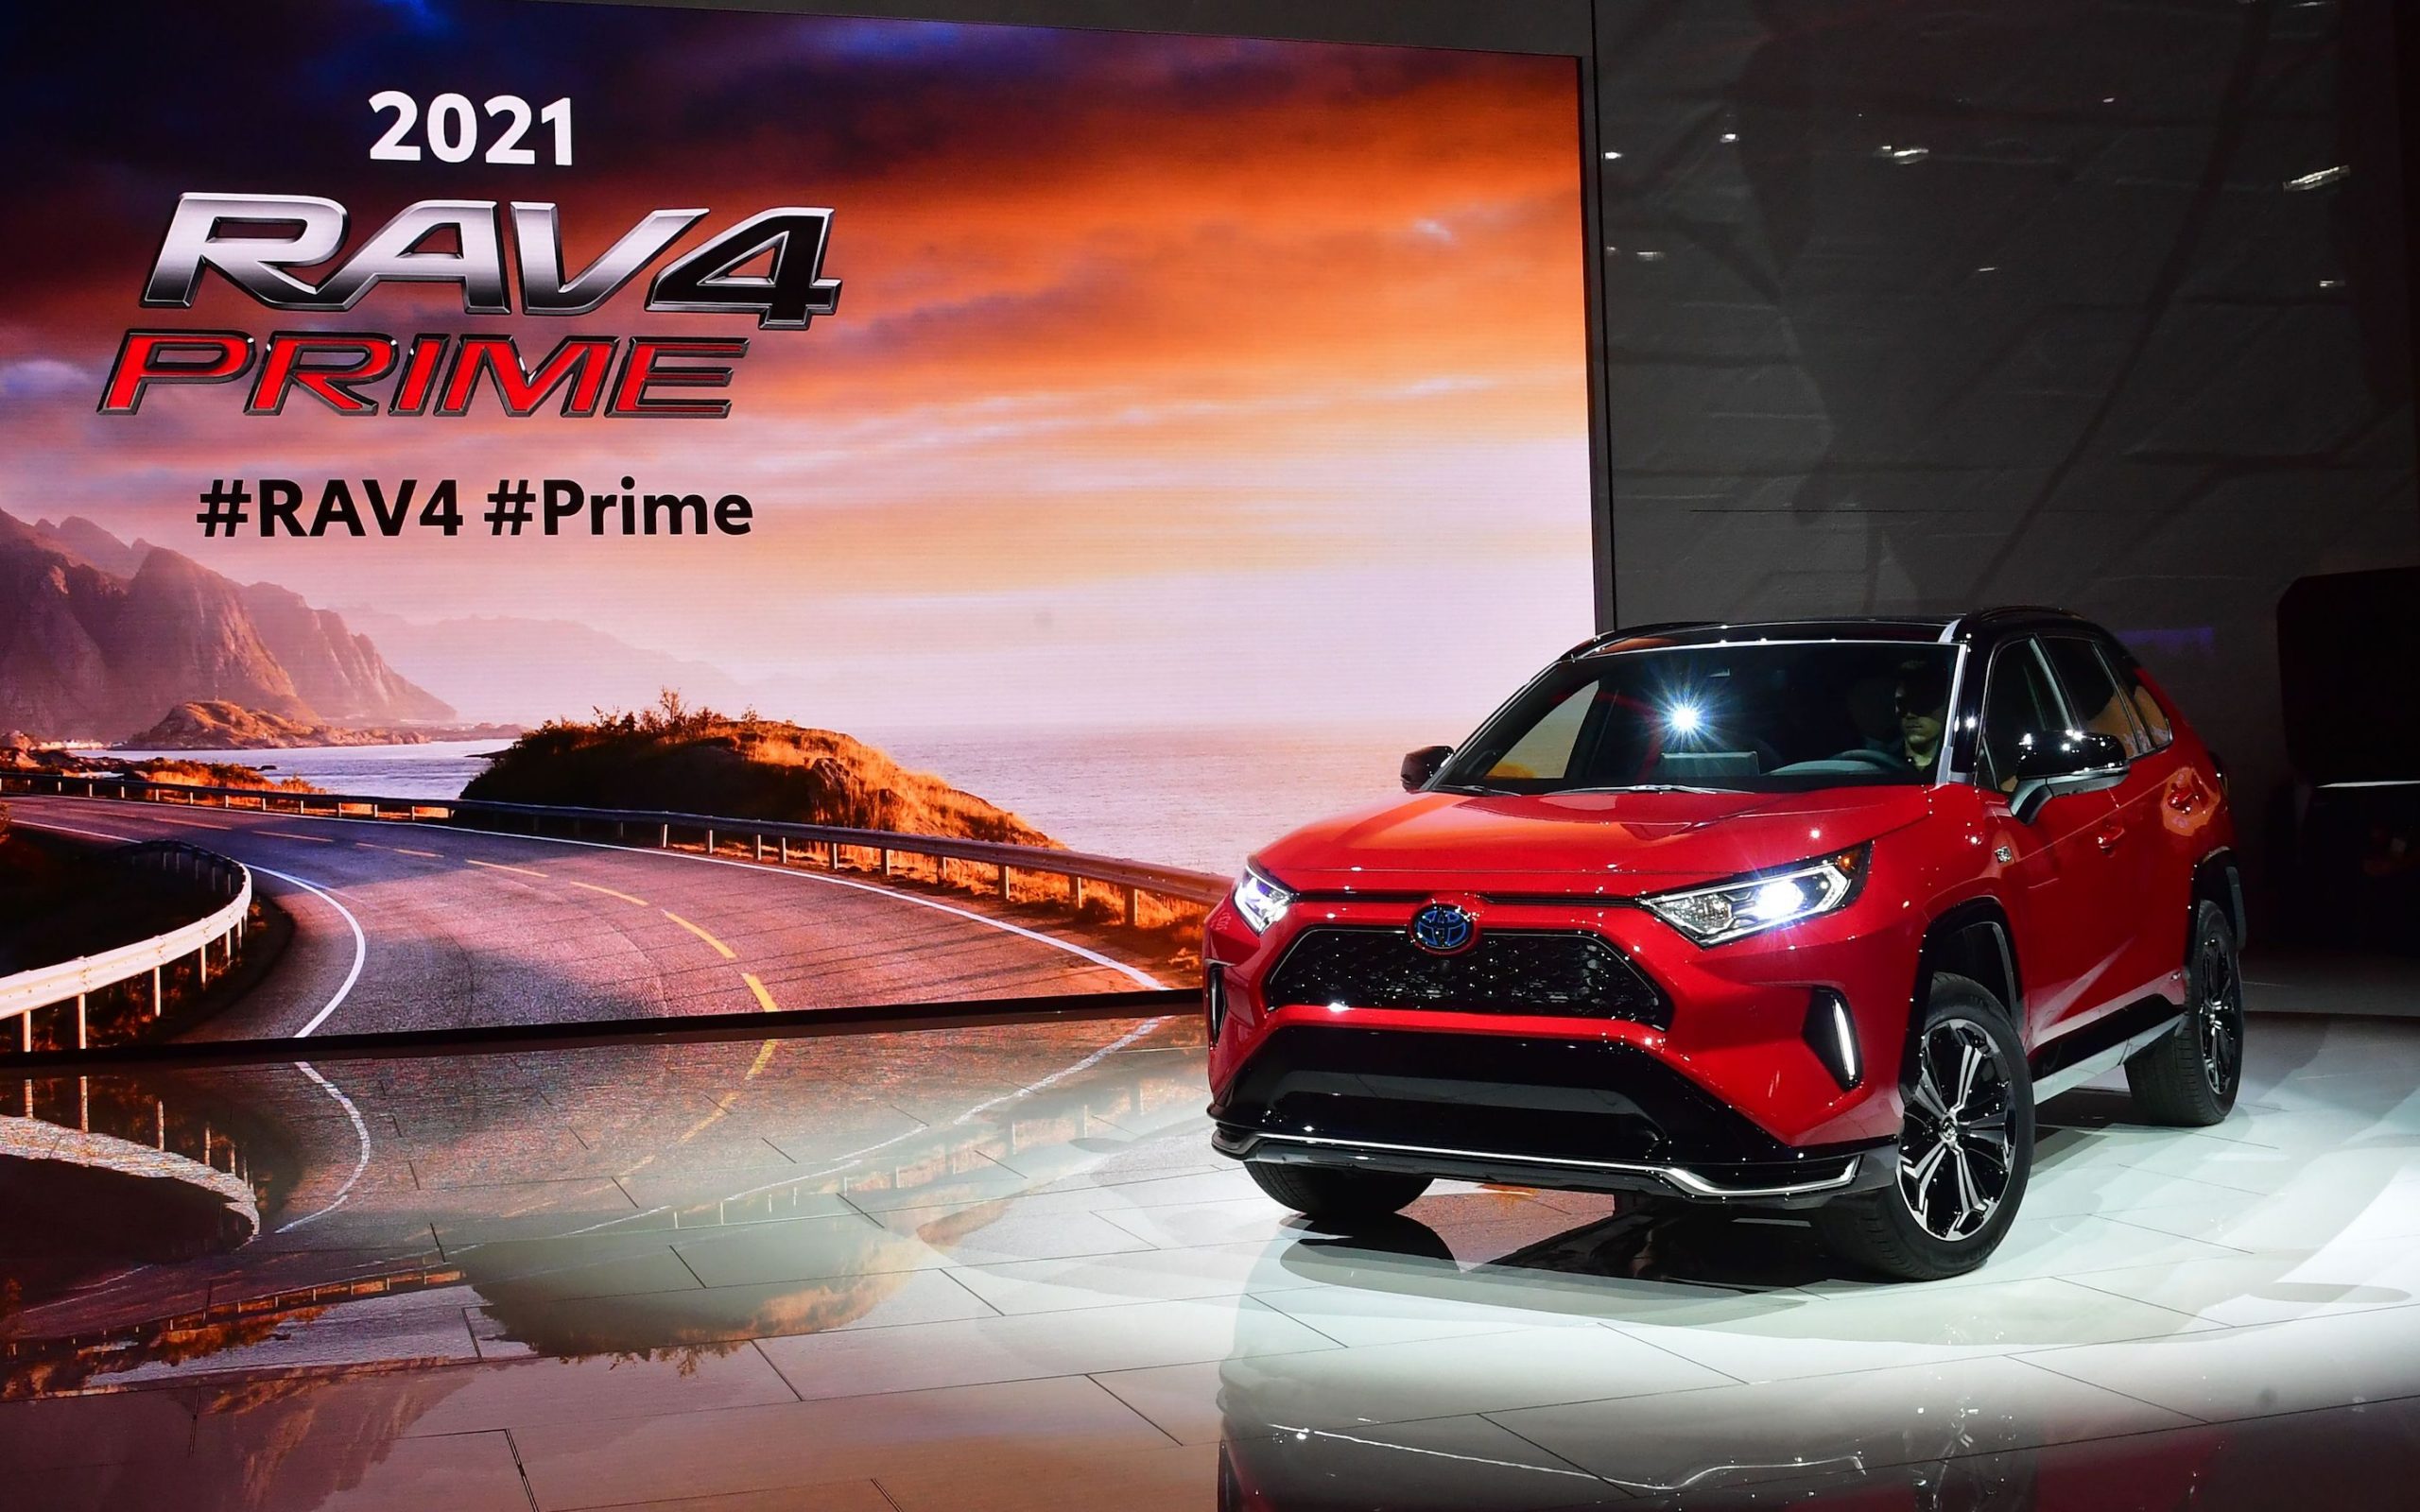 The 2021 Toyota Rav4 Prime unveiled and on display at the 2019 Los Angeles Auto Show